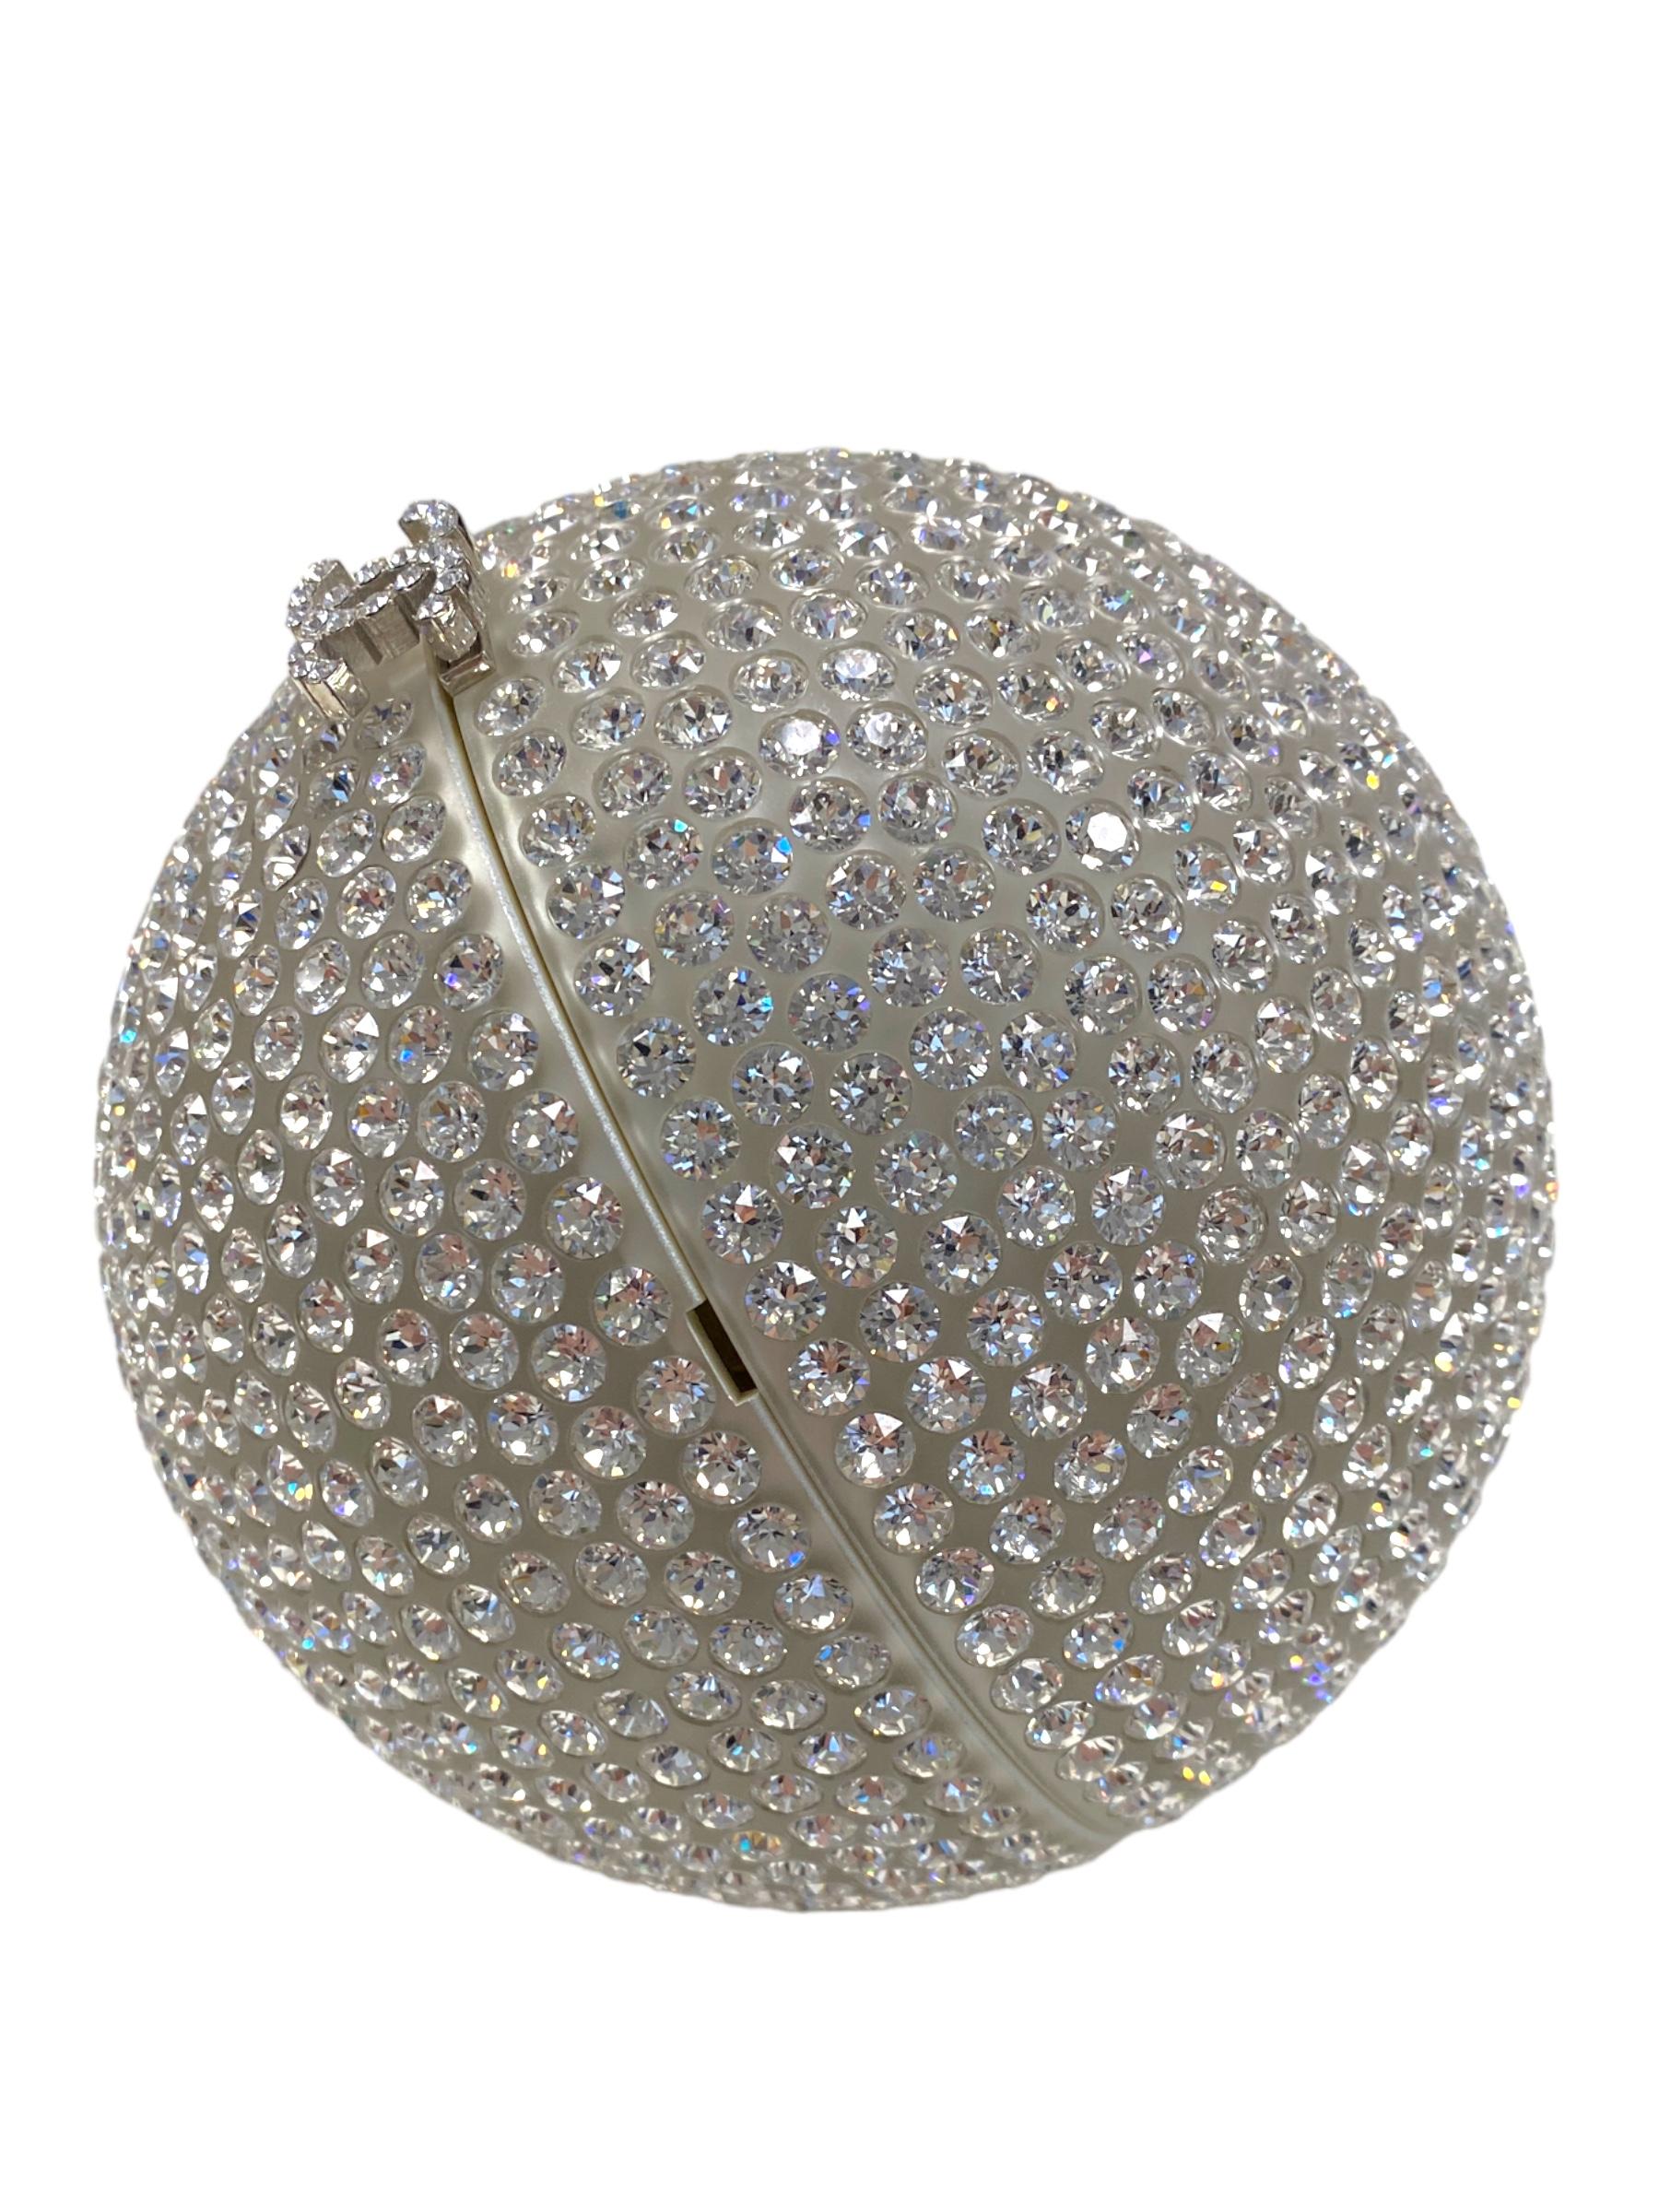 Chanel Minaudière Limited Edition Crystal Ball Evening Clutch 1